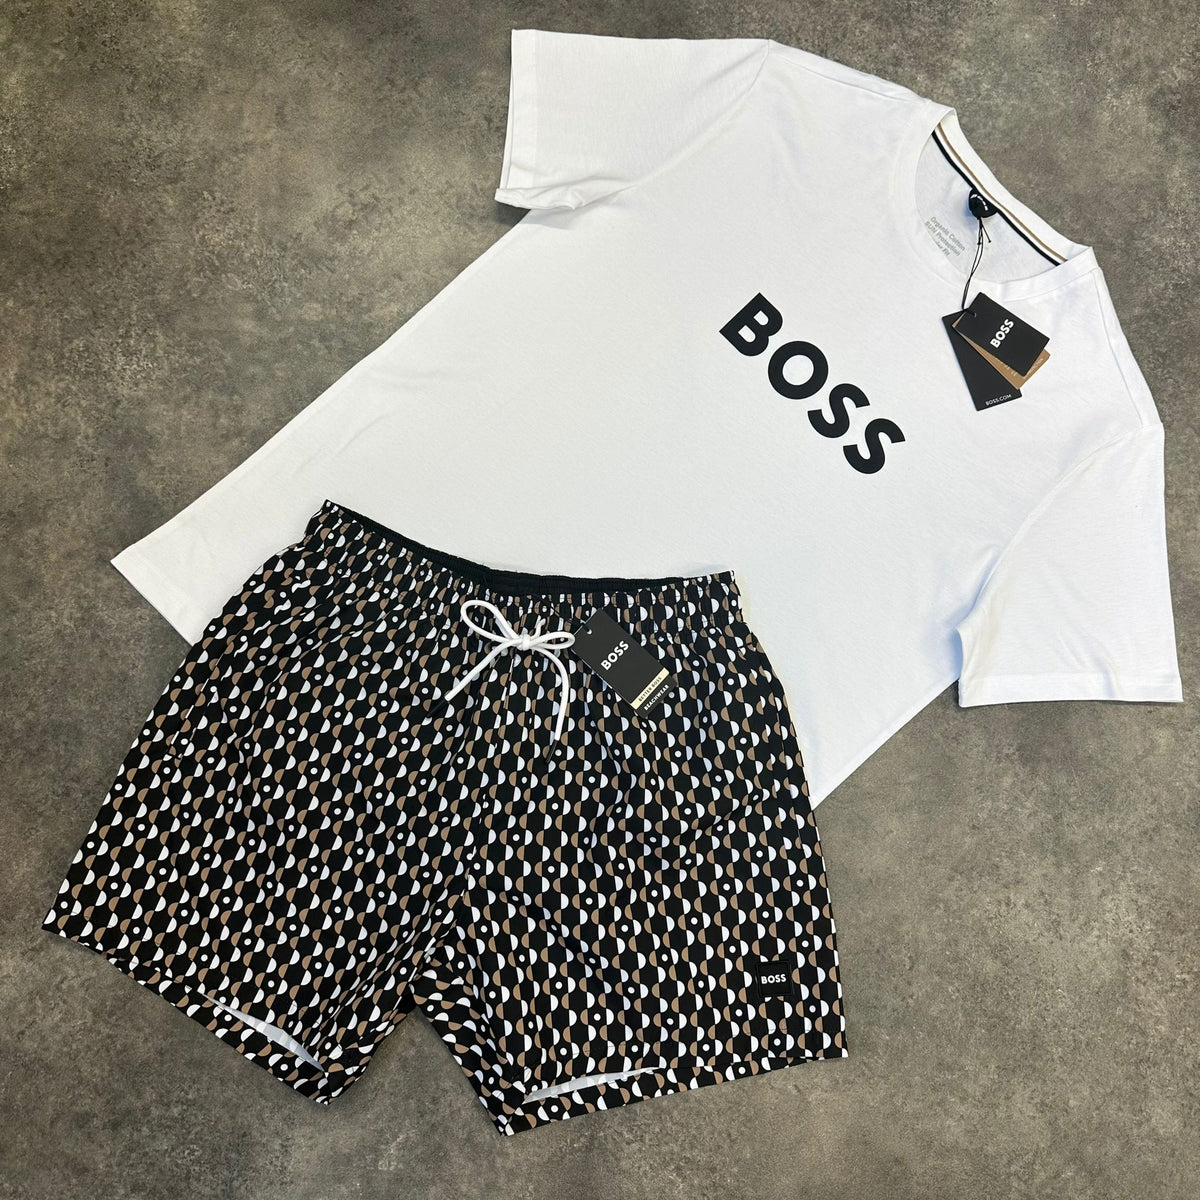 BOSS - Cotton-blend regular-fit shorts with multicolored logo